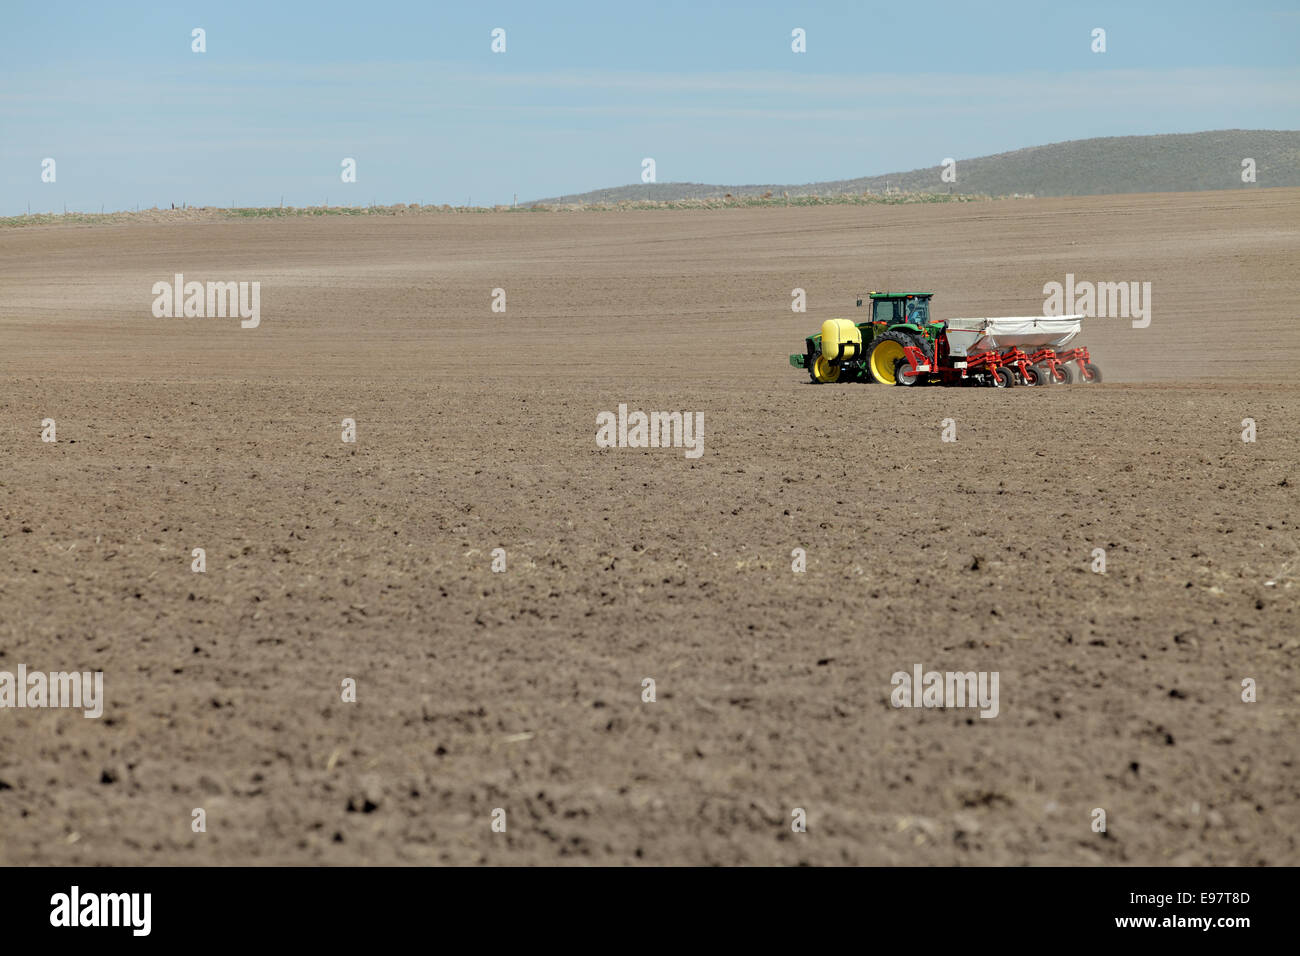 Tractors working planting potatoes in the fertile farm fields of Idaho. Stock Photo